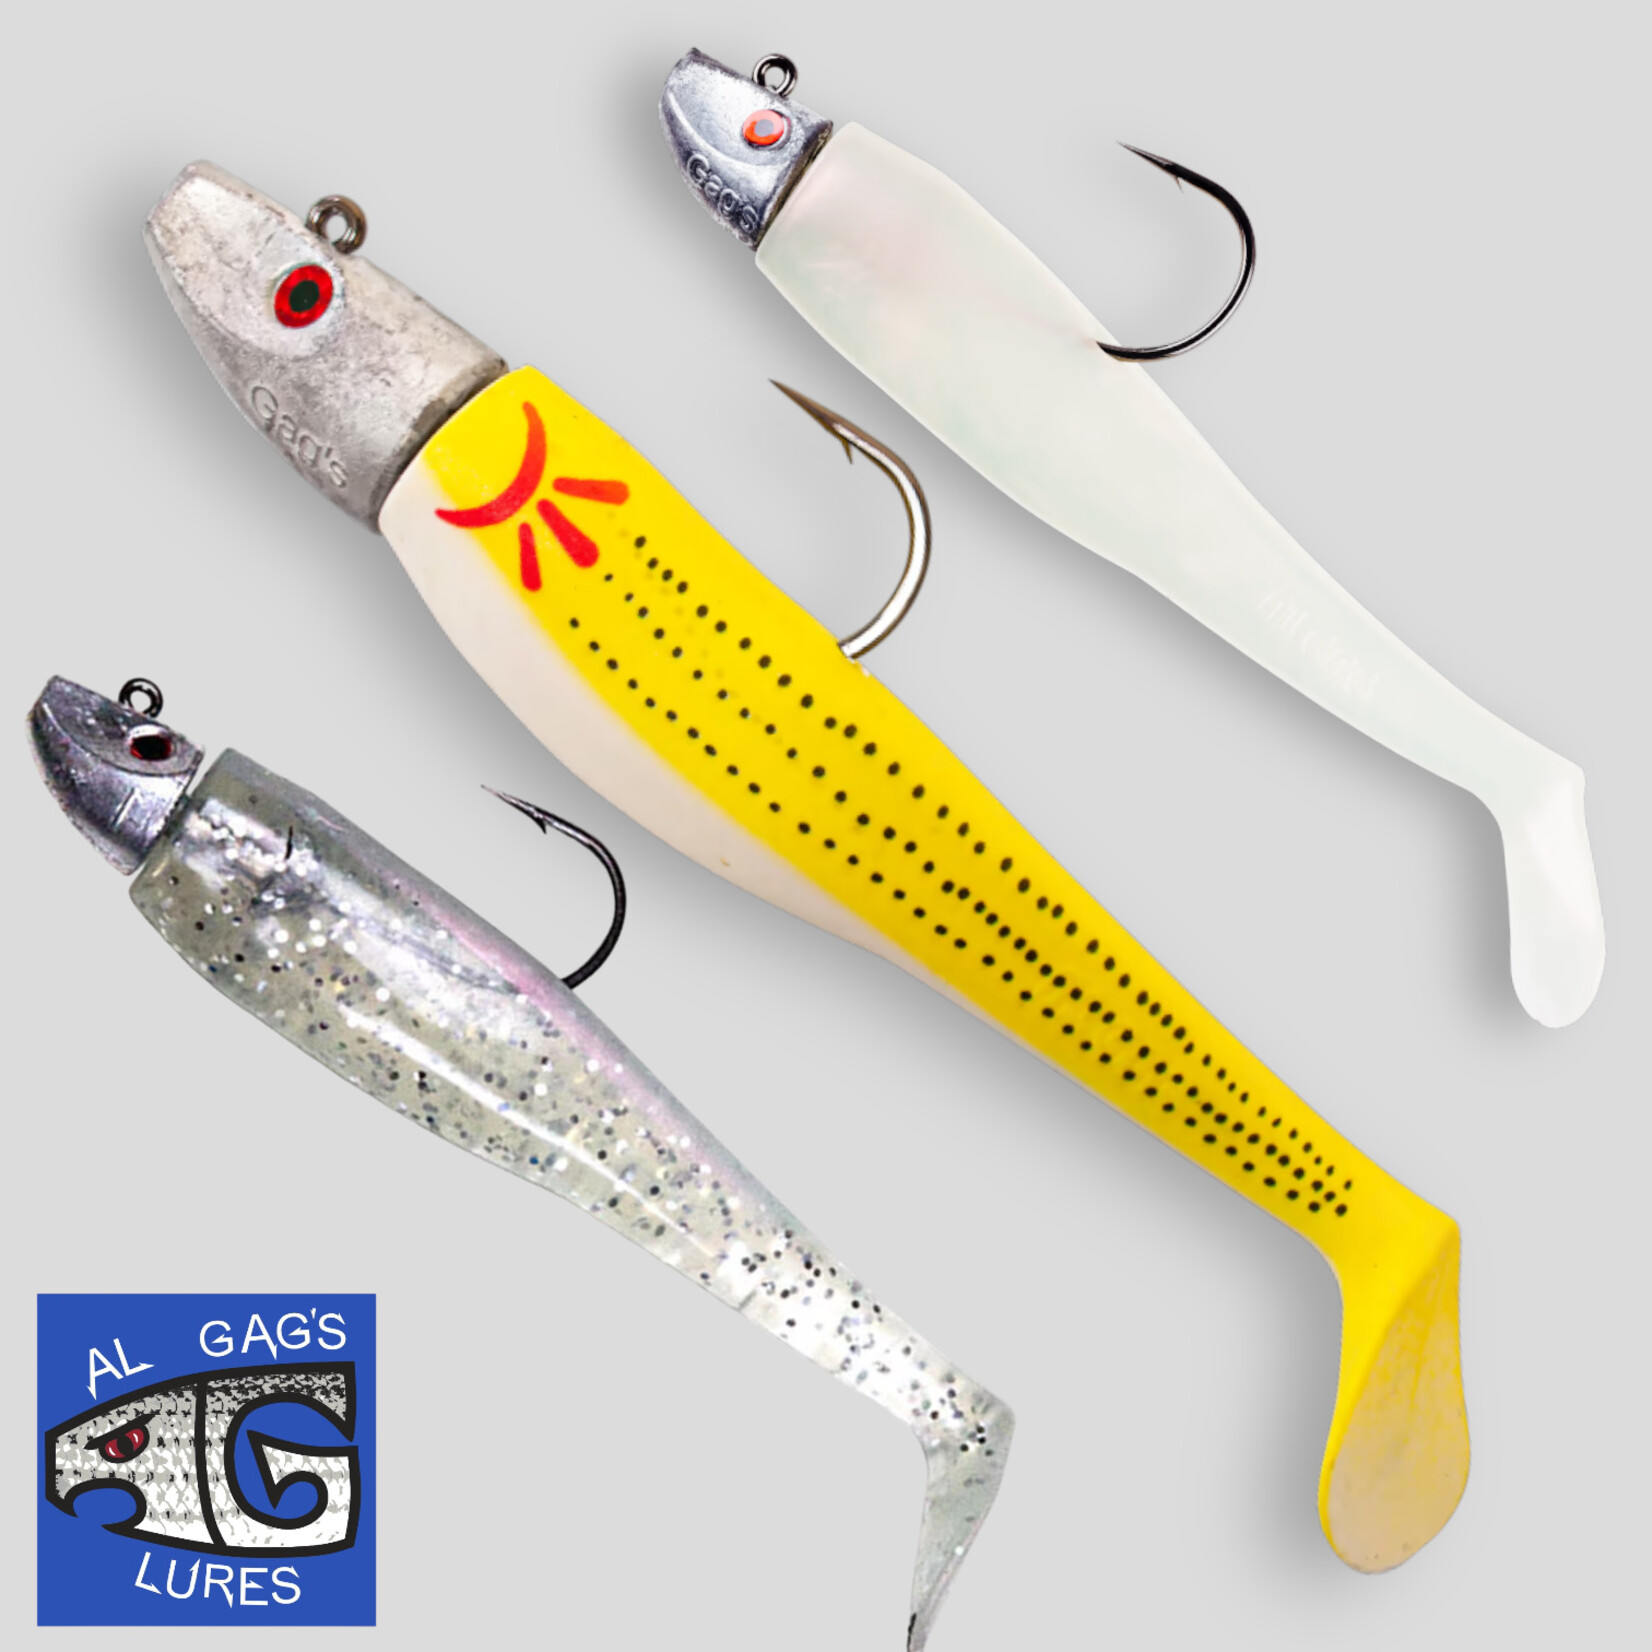 Al Gags Whip it Fish - Tyalure Tackle